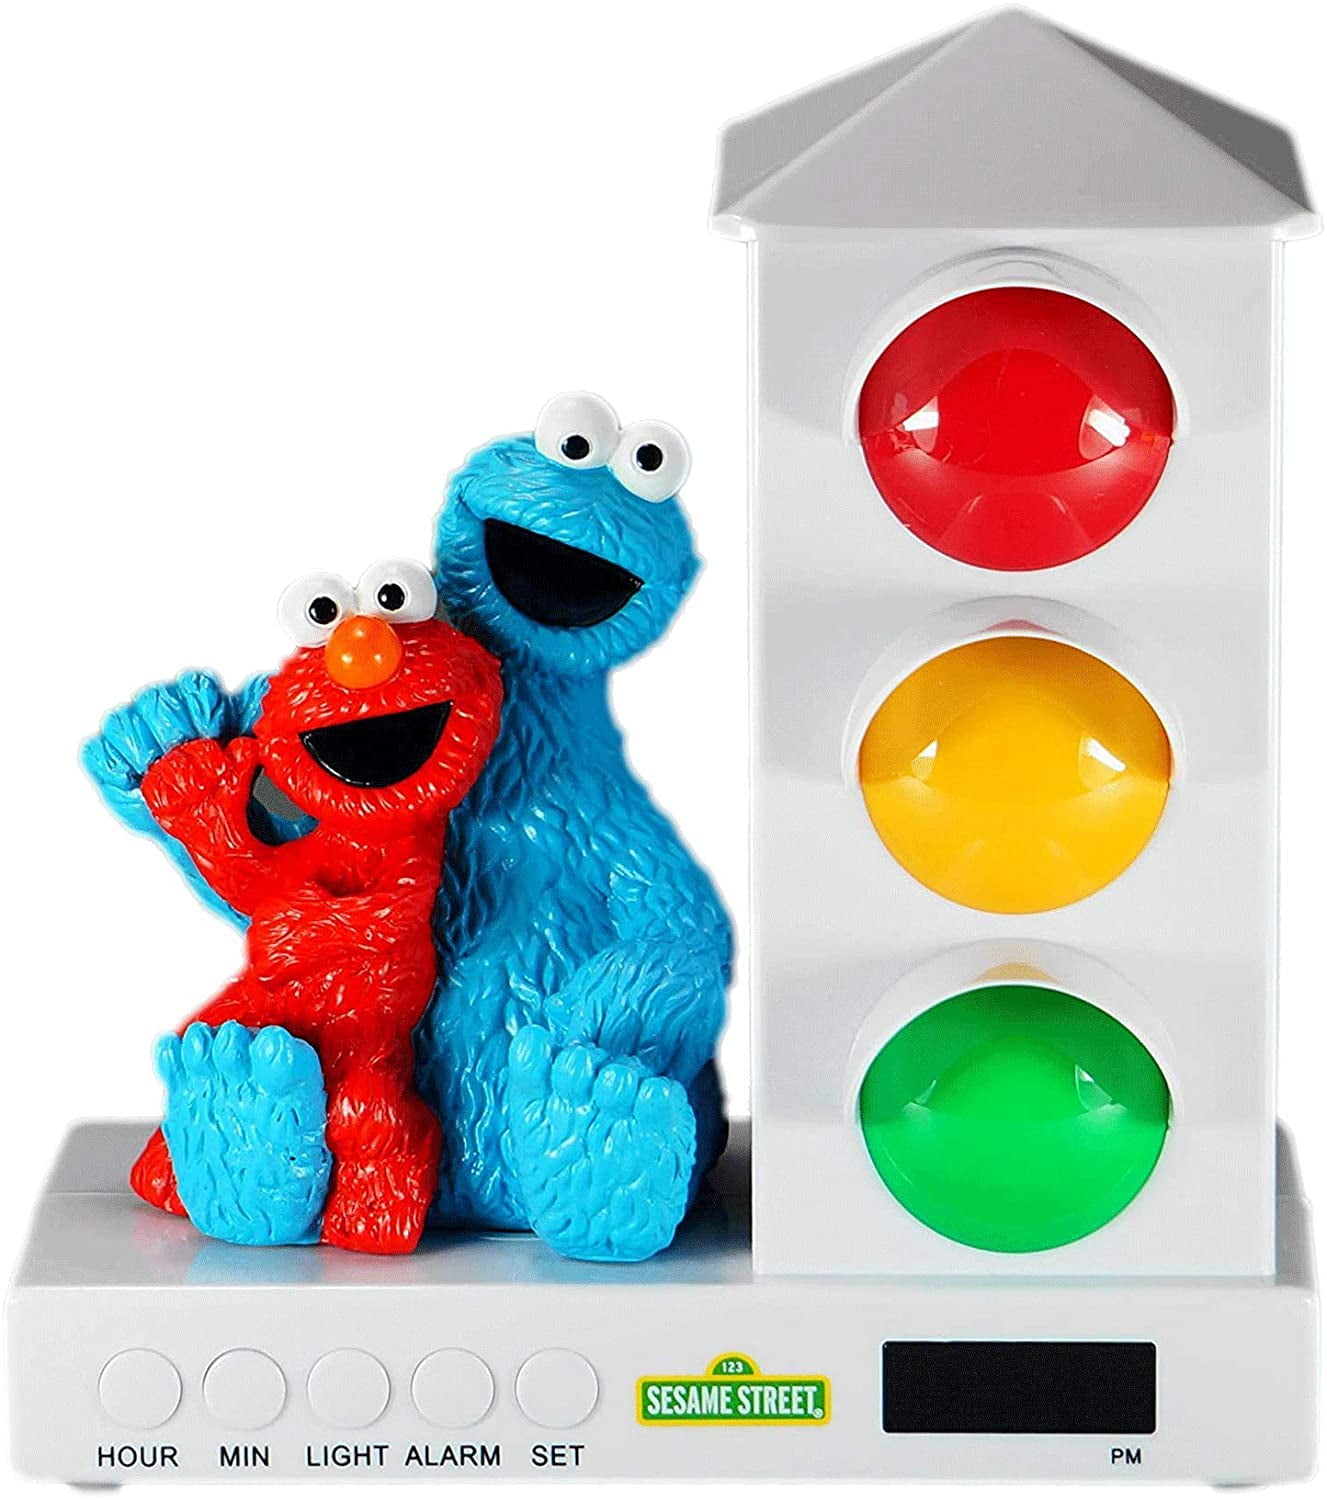 Its About Time Stoplight Sleep Enhancing Alarm Clock for Kids Red and Blue Sports Car